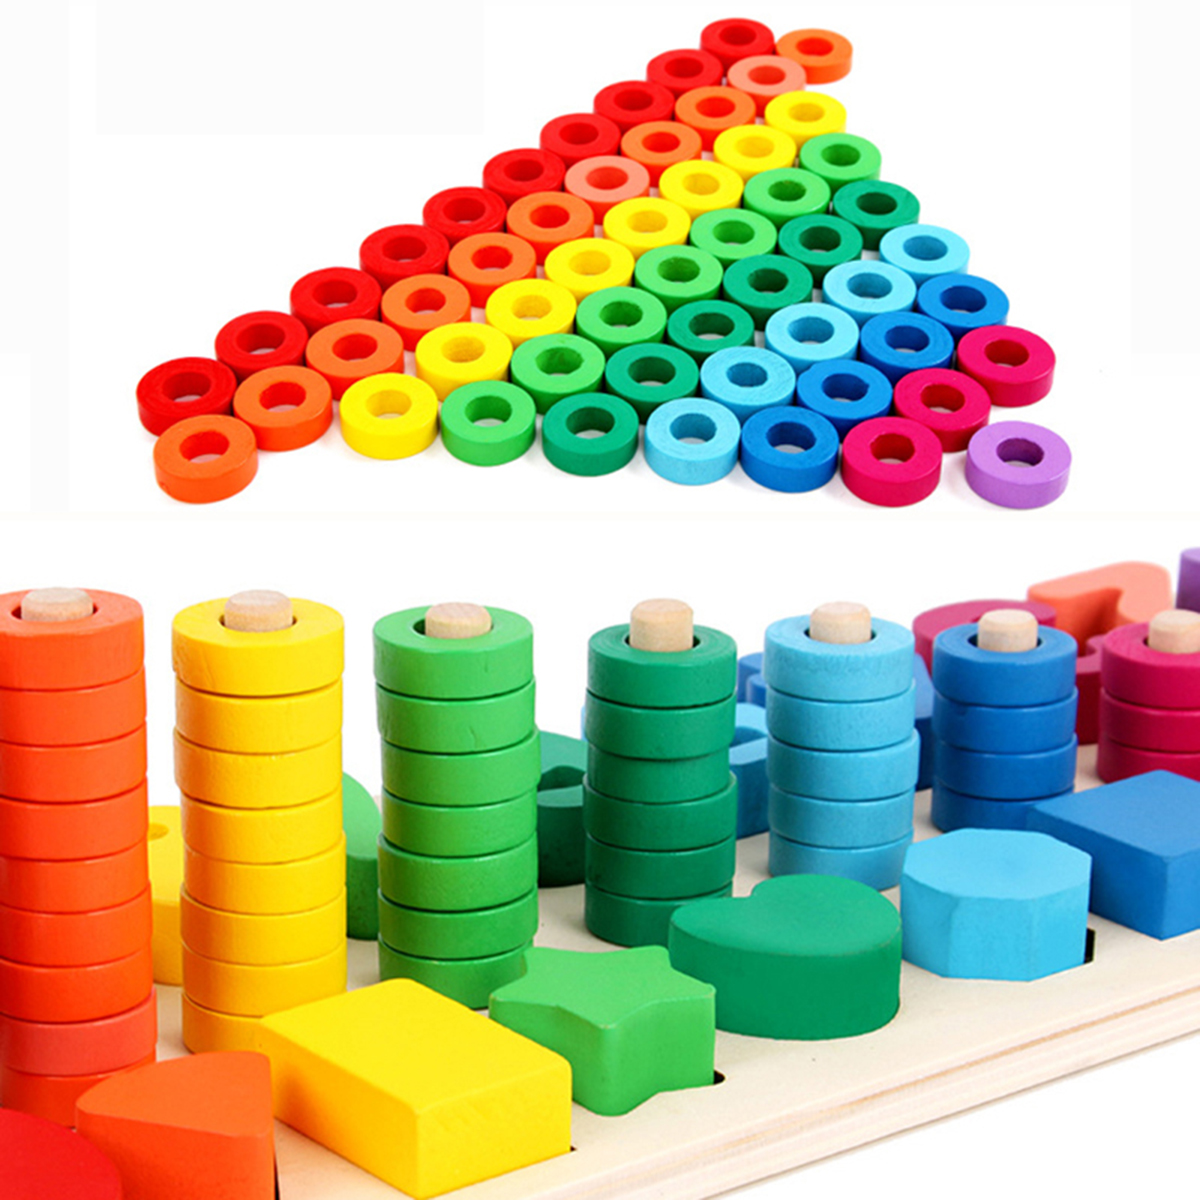 Children-Wooden-Montessori-Materials-Learning-To-Count-Numbers-Matching-Digital-Shape-Match-Early-Ed-1605437-5